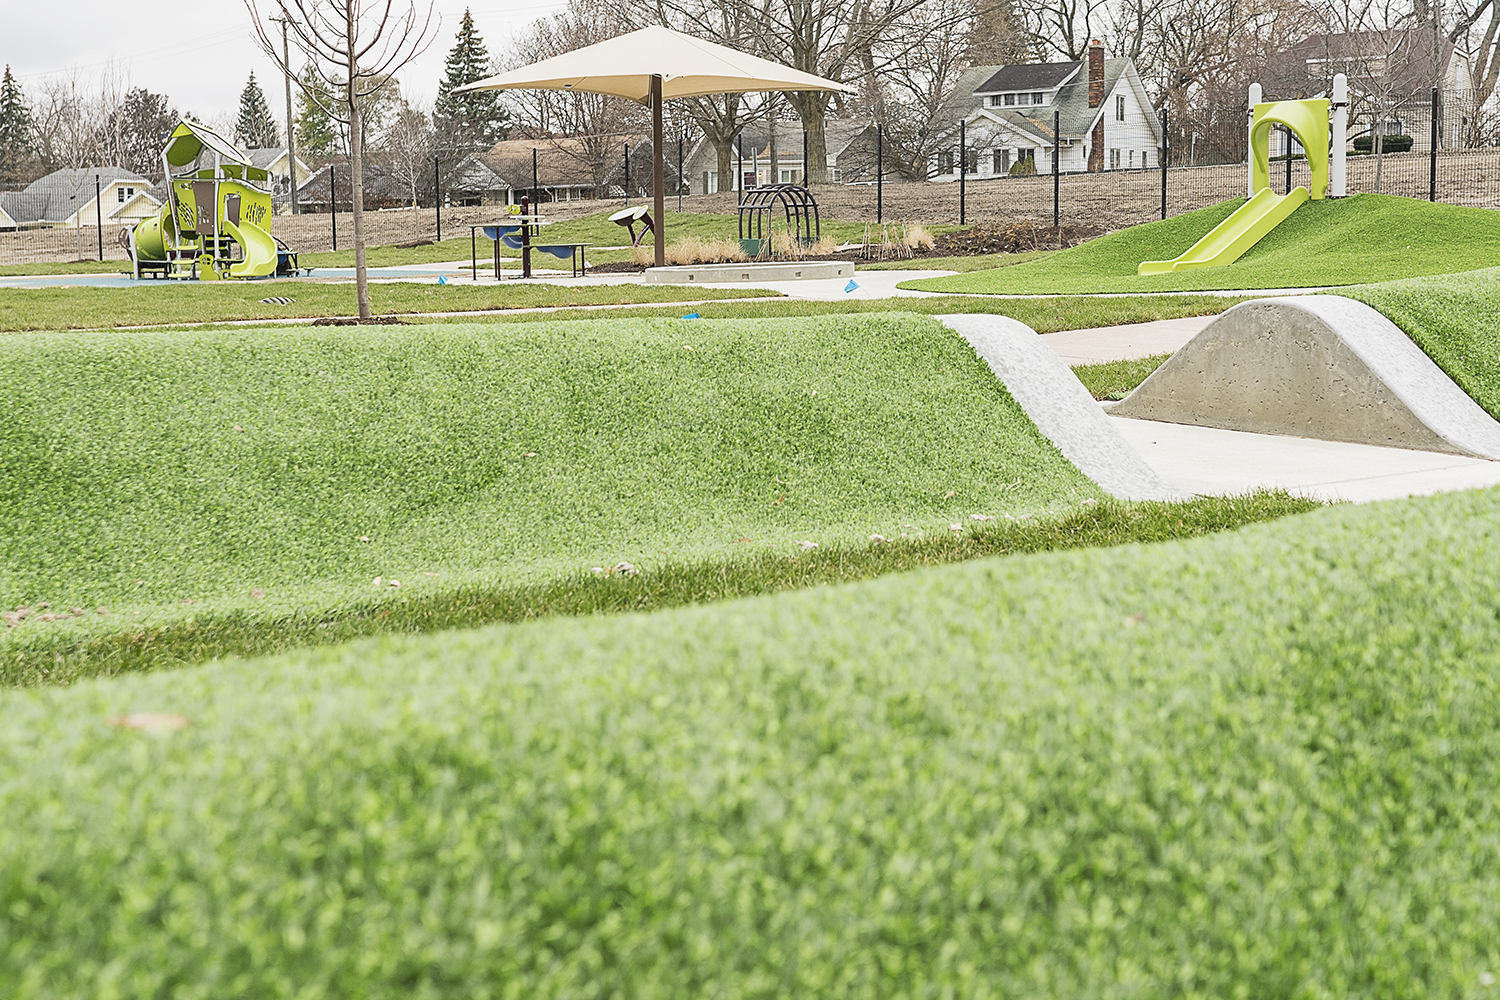 Flint, MI - Tuesday, November 21, 2017: Small rolling hills are just part of a large playscape outside of four classrooms at the new Educare Center in Flint.